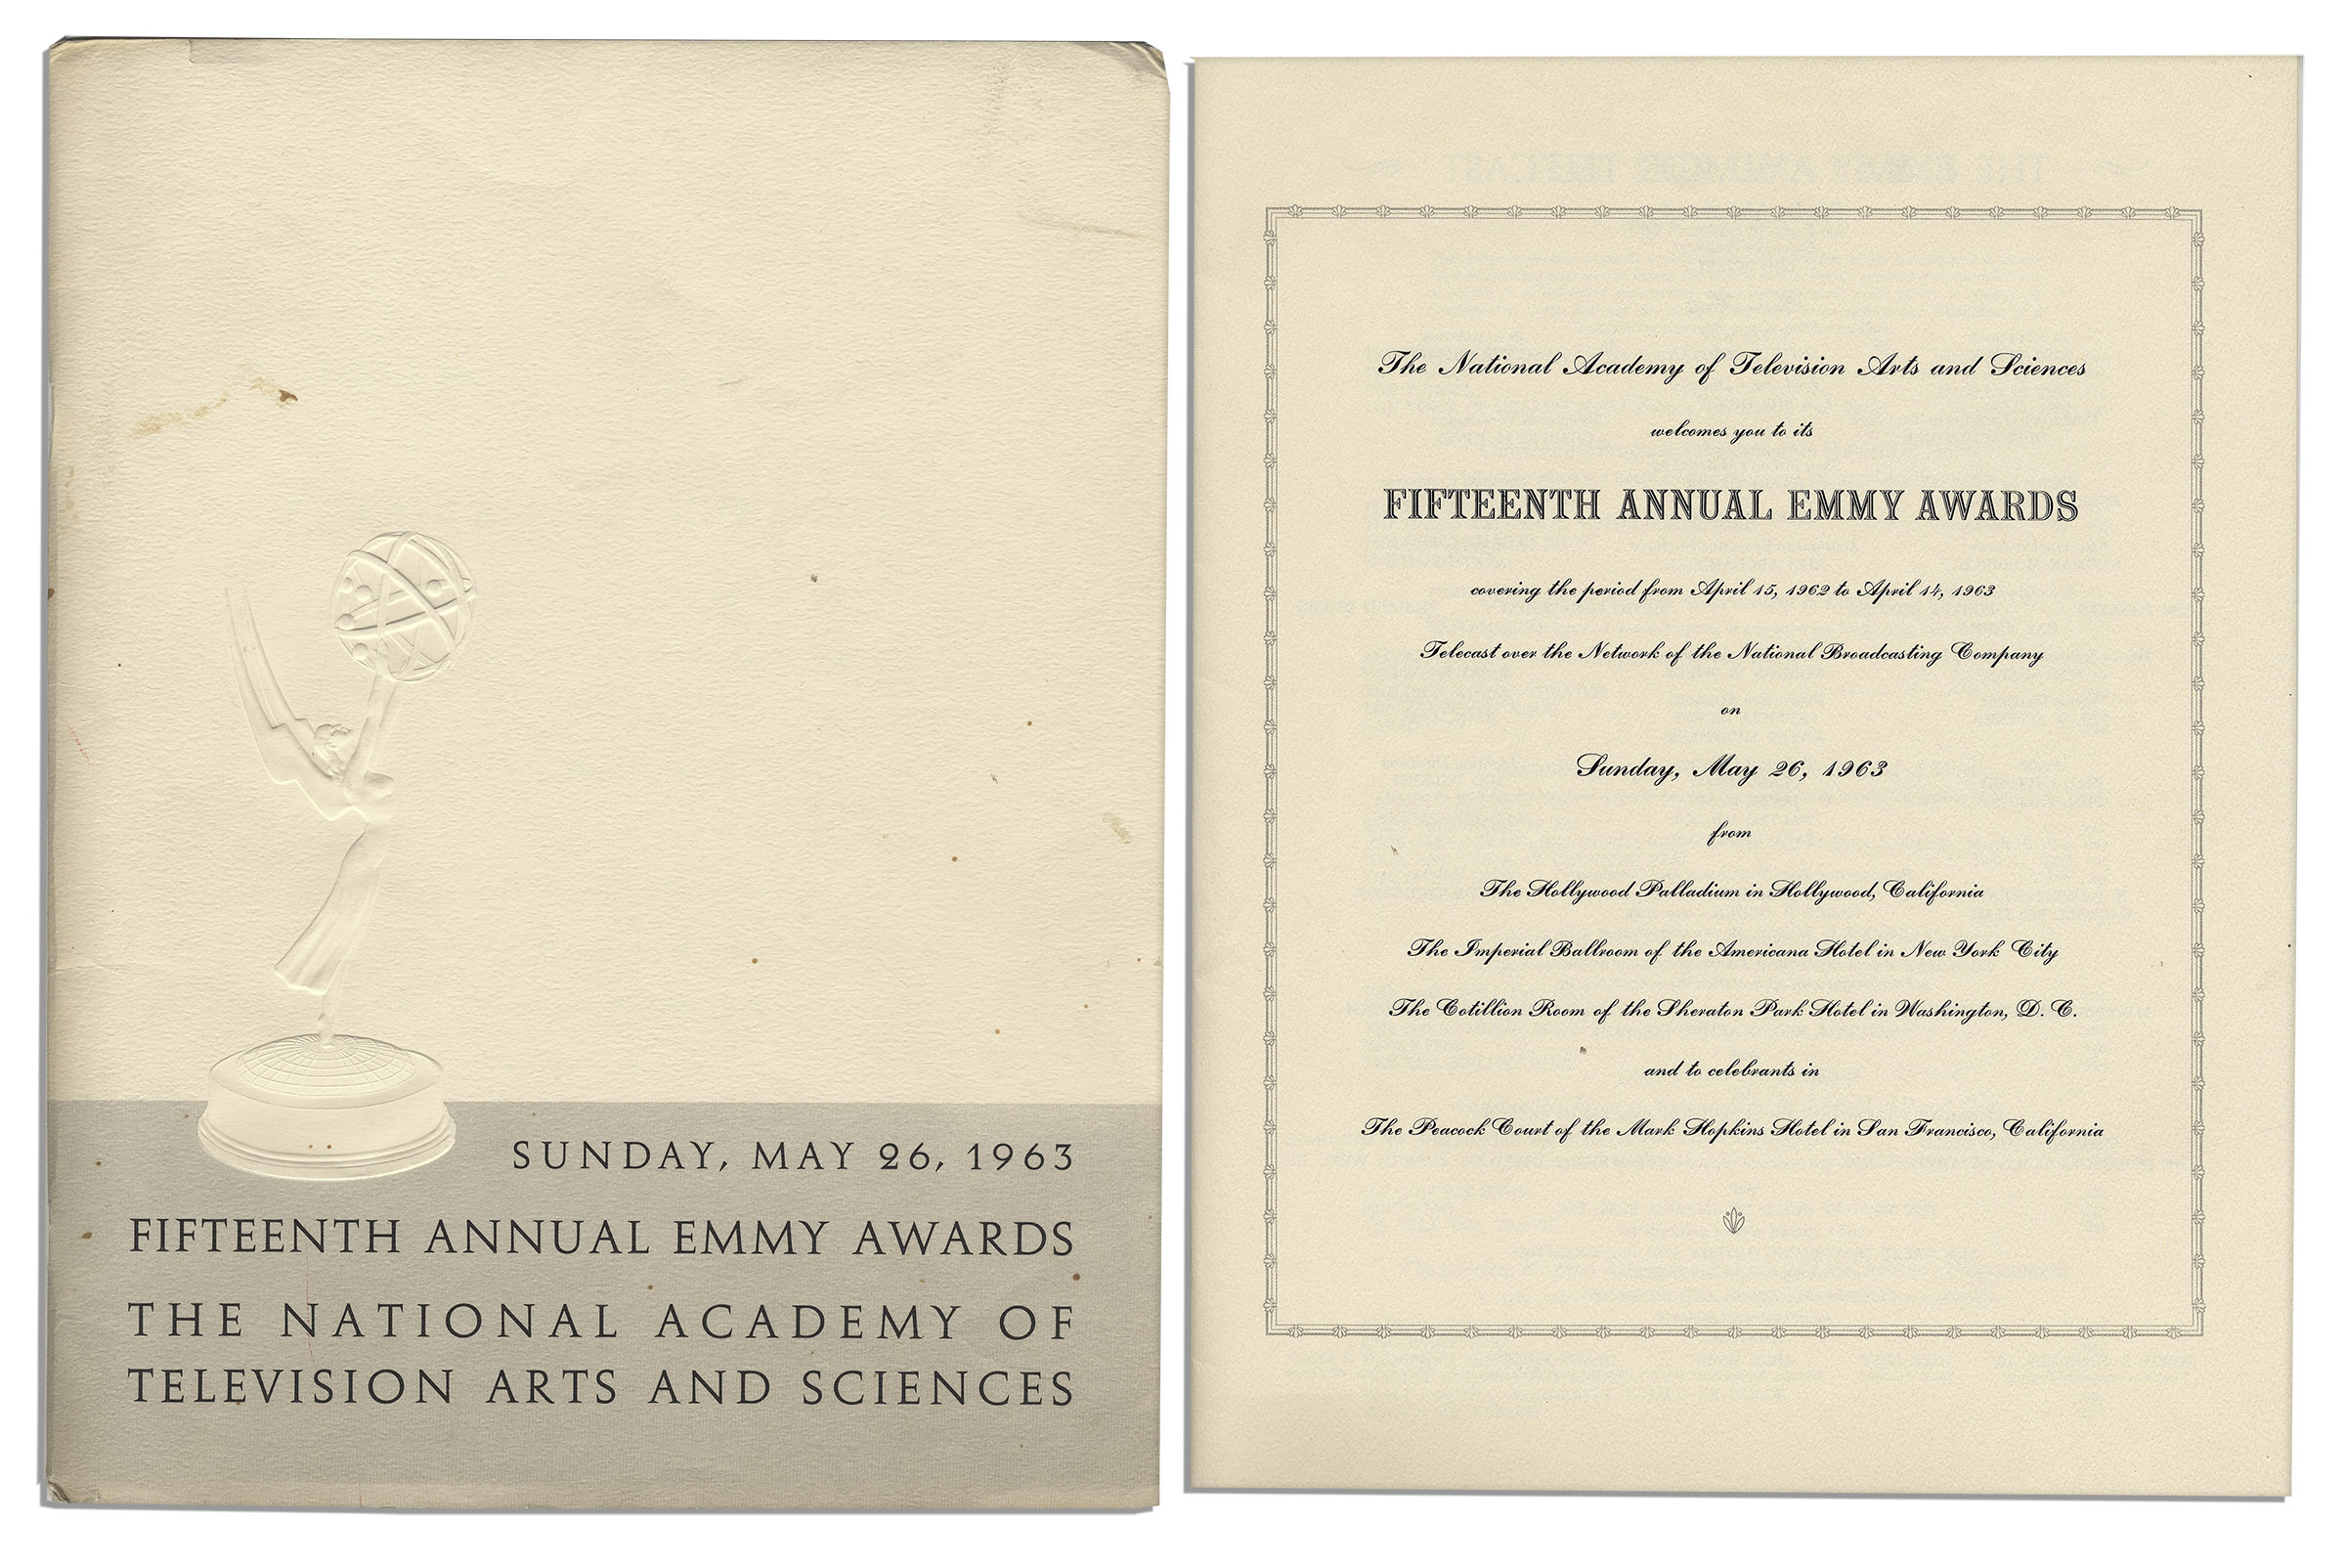 Emmy Awards program from the 15th annual ceremony in 1963. NATAS program cover features an